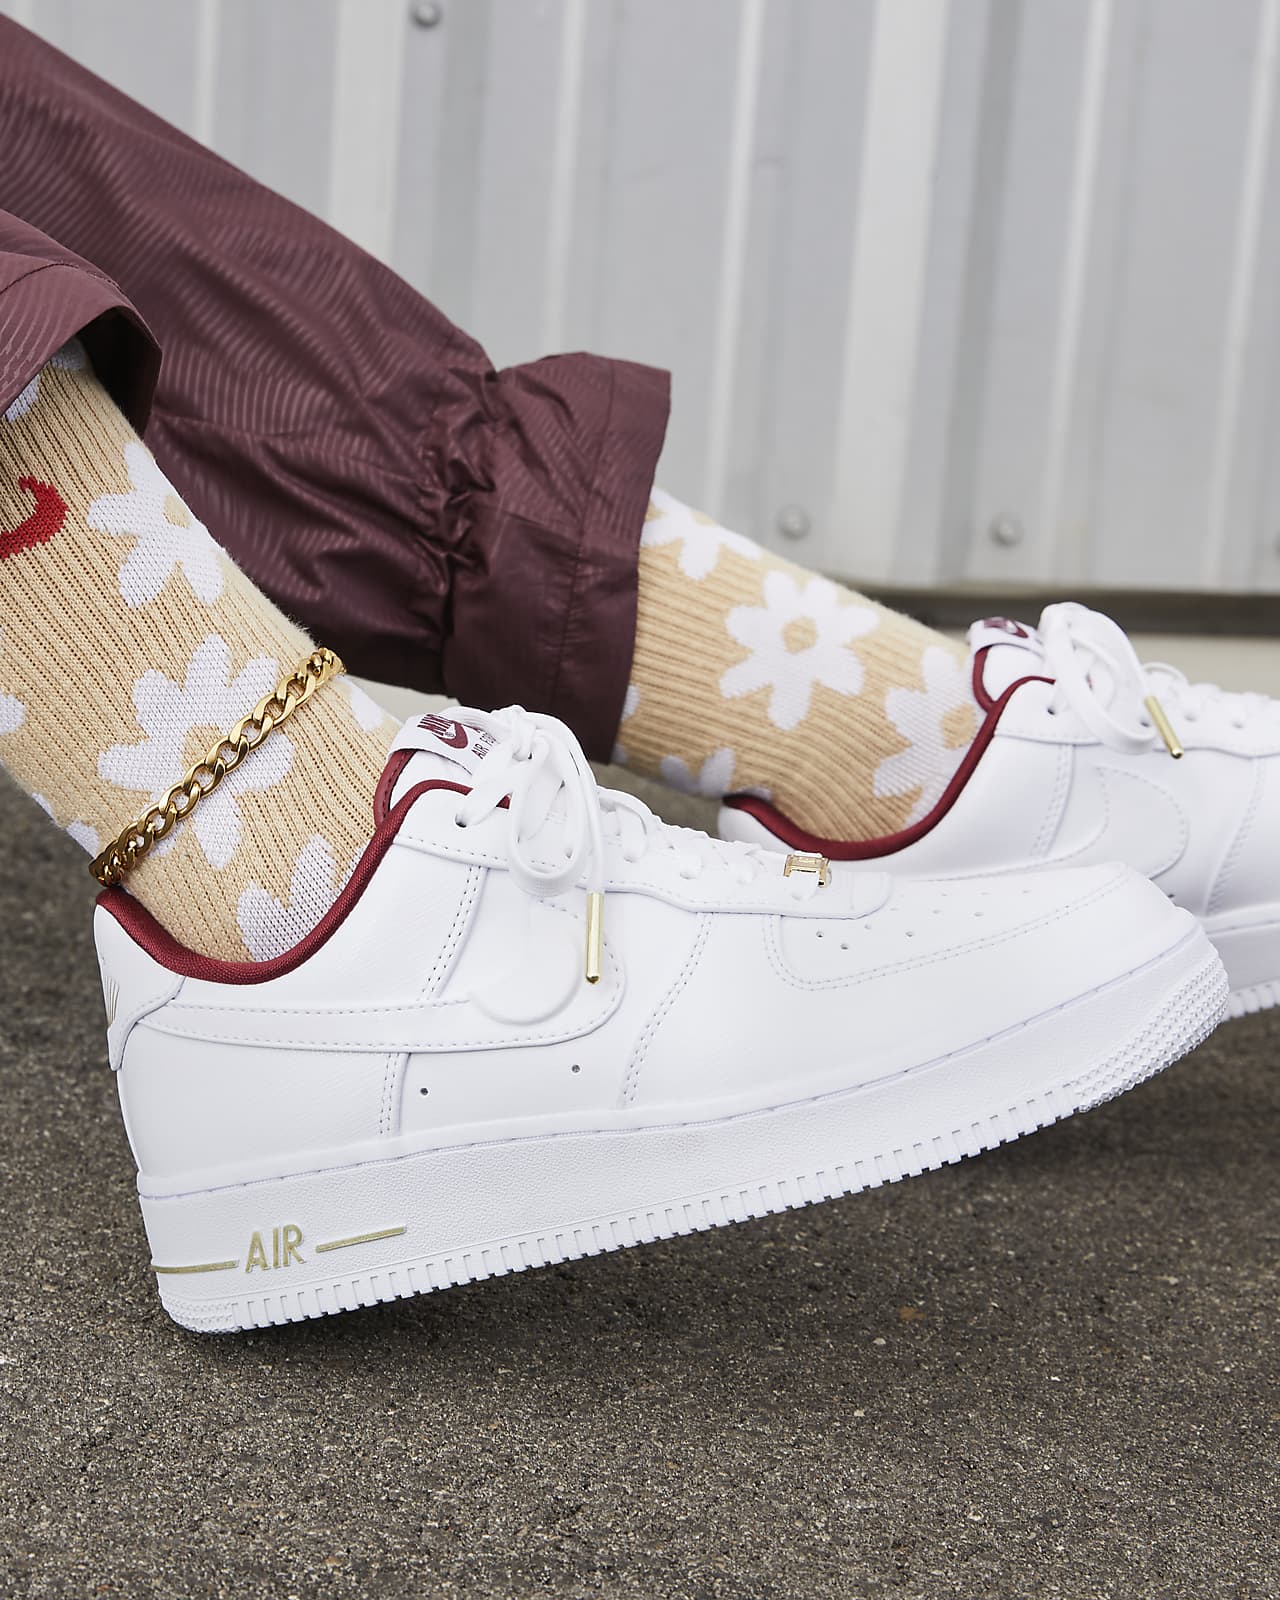 Nike Womens Air Force 1 07 Shoes